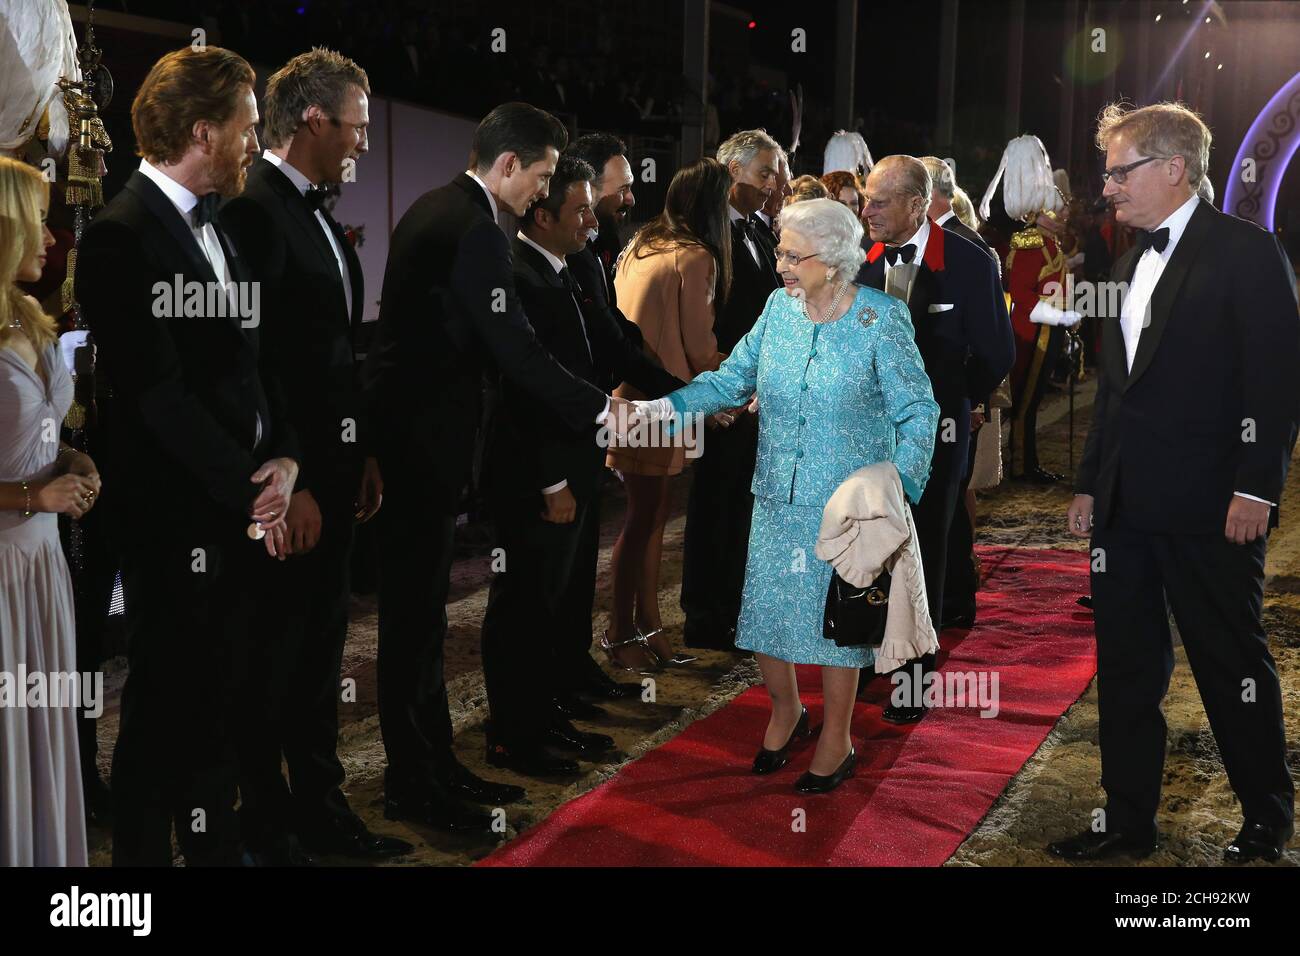 Queen Elizabeth II greets performers during the televised celebration of her 90th birthday in the grounds of Windsor Castle in Berkshire. Stock Photo